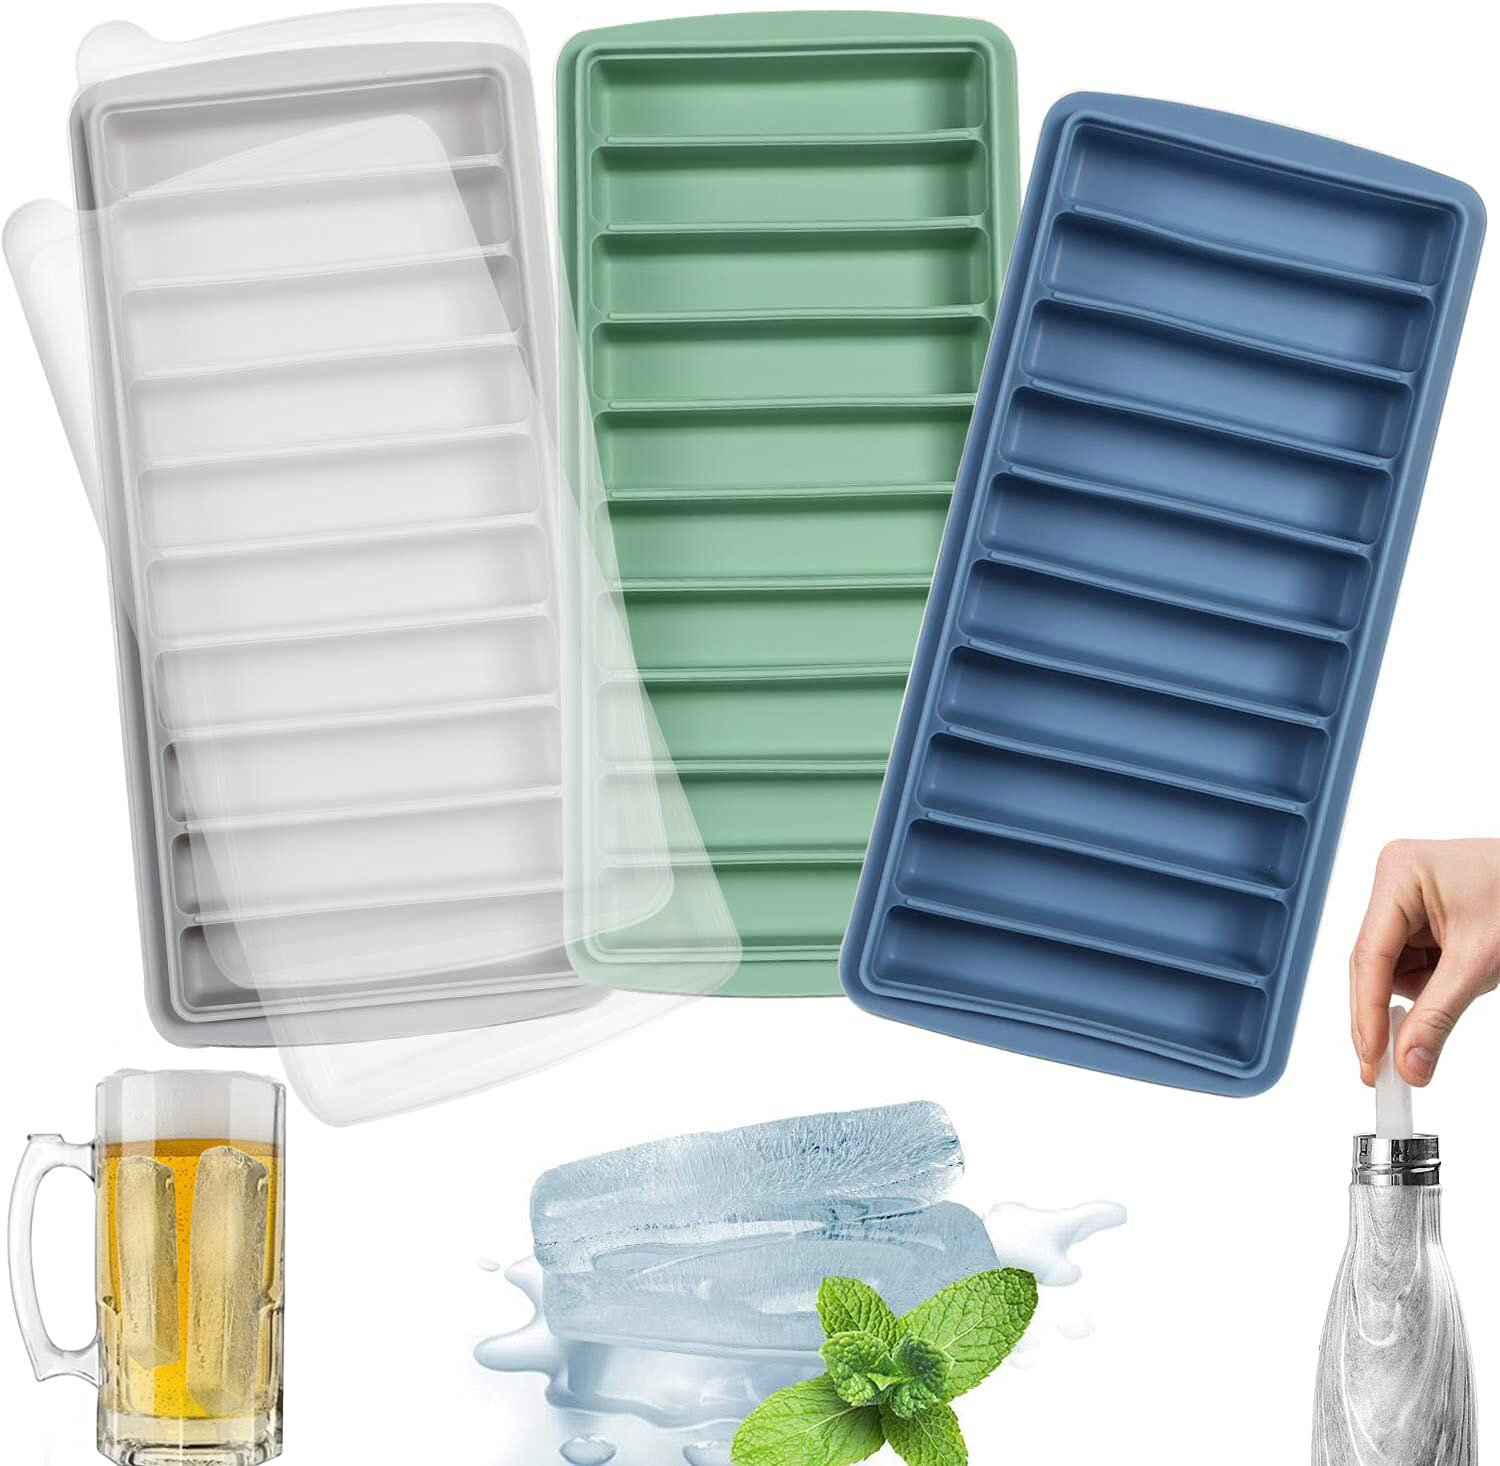 2 x Bottle Ice Stick Tray Fits For Water Ice Cubes Plastic Mould Ice Cream Maker